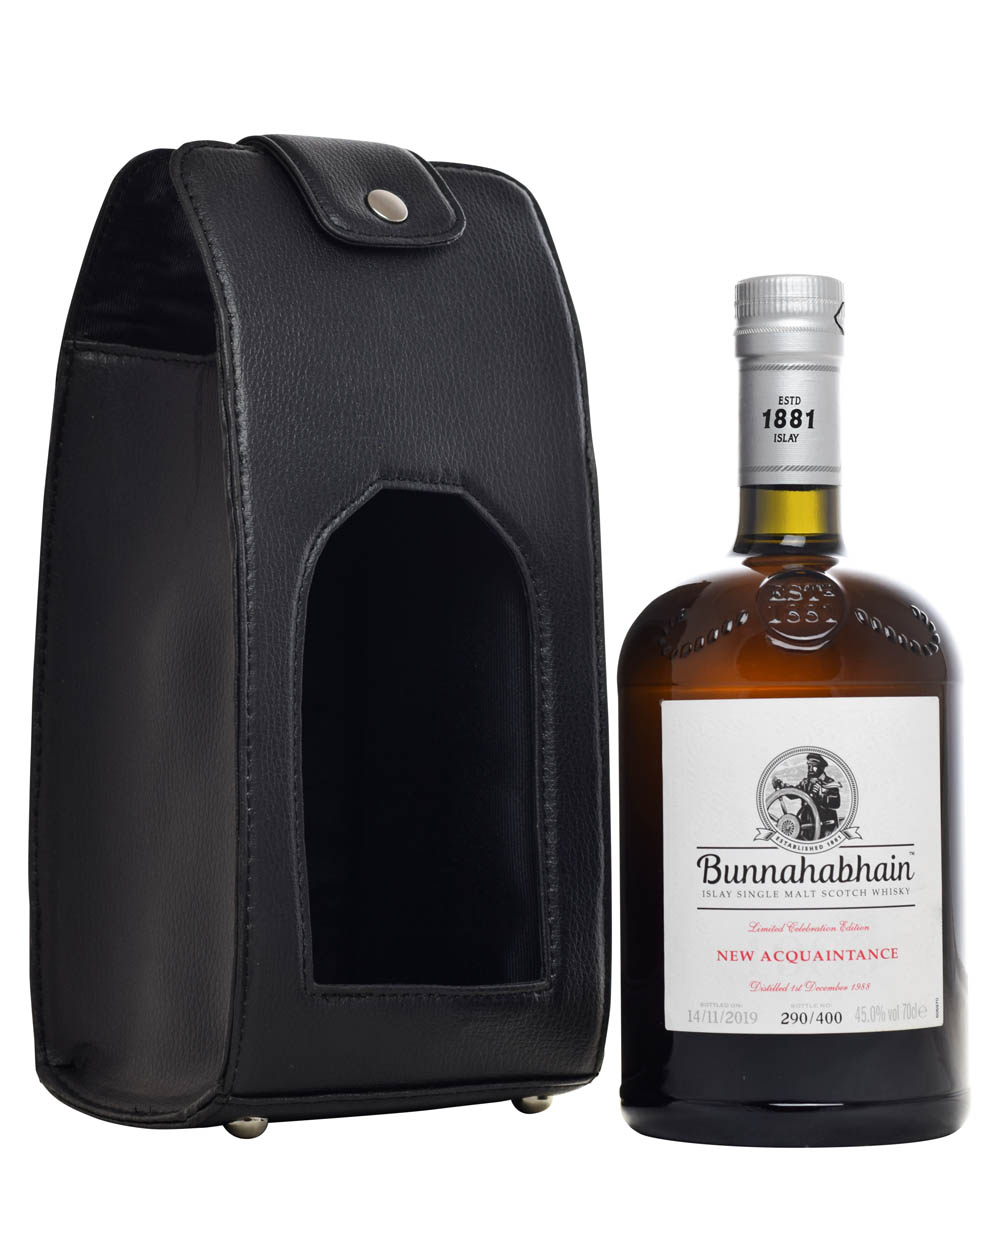 Bunnahabhain New Acquaintance 1988 Limited Edition Leather Case 2 Musthave Malts MHM